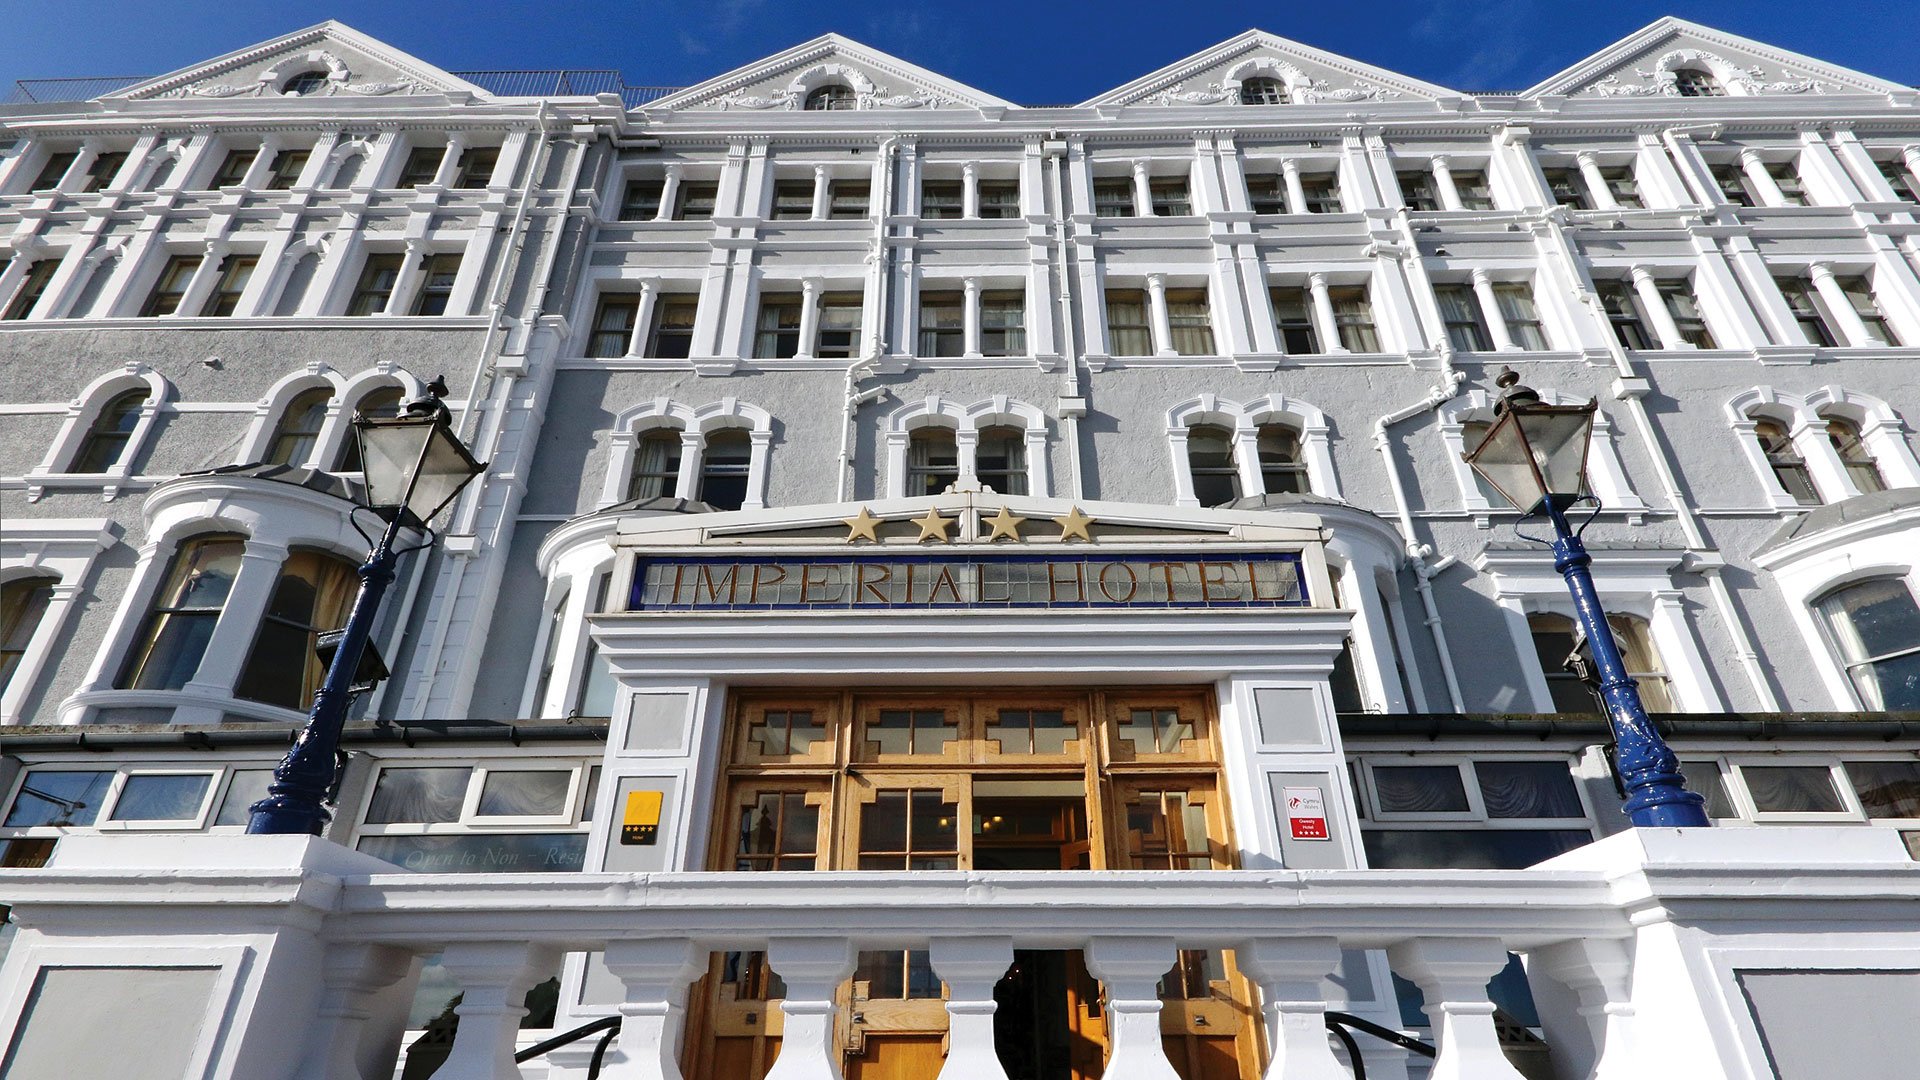 The traditional Victorian seafront building - The Imperial Hotel, Llandudno